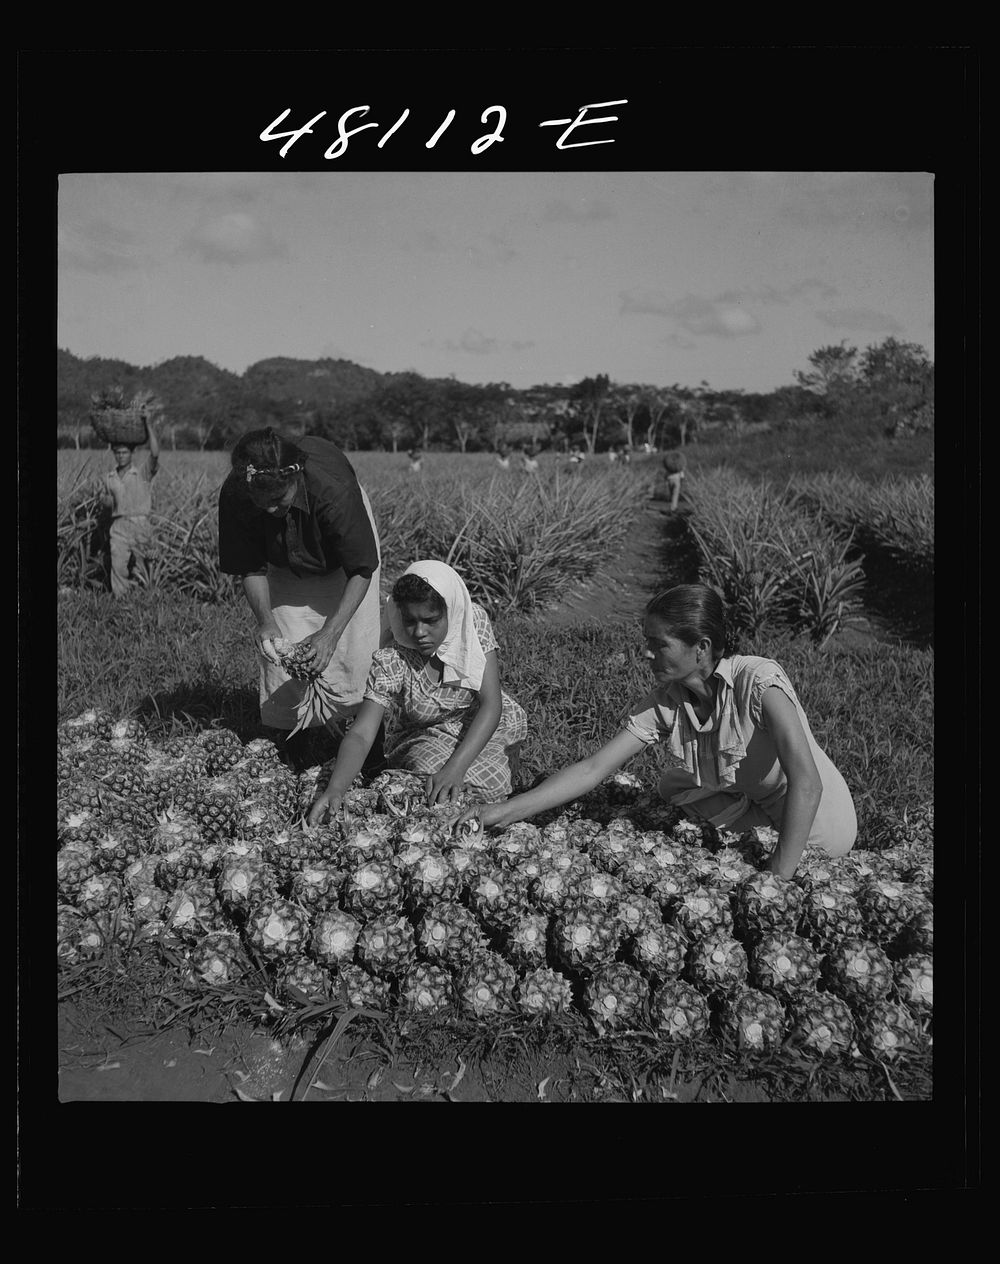 Manati, Puerto Rico (vicinity). On a pineapple plantation. Sourced from the Library of Congress.